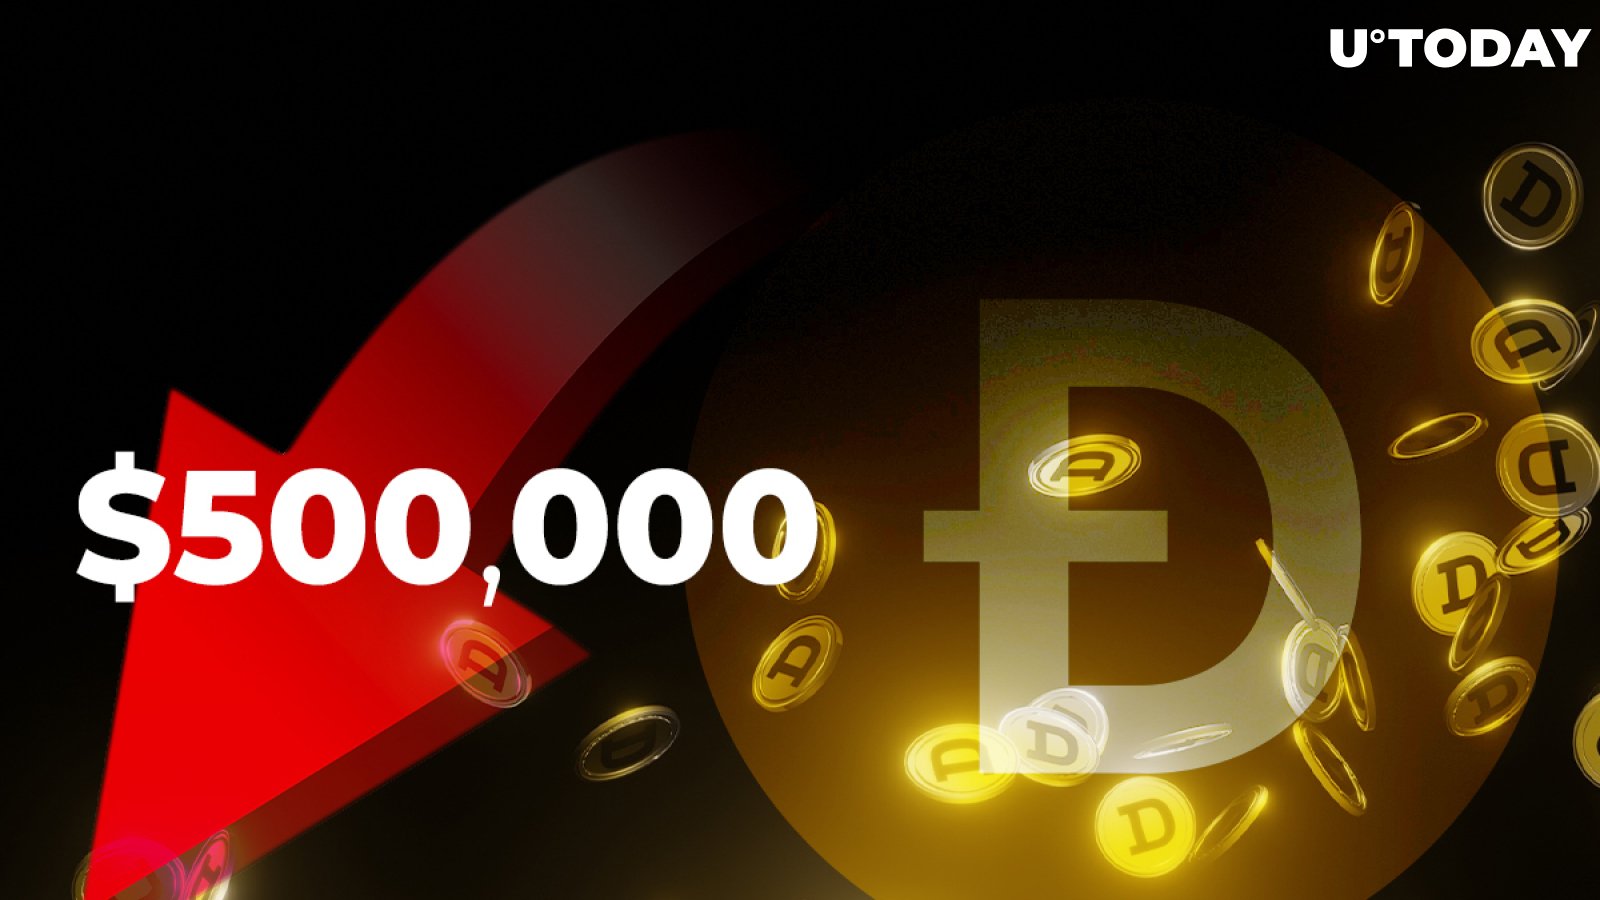 Dogecoin “Millionaire” Loses $500,000 on His Doge Holdings 